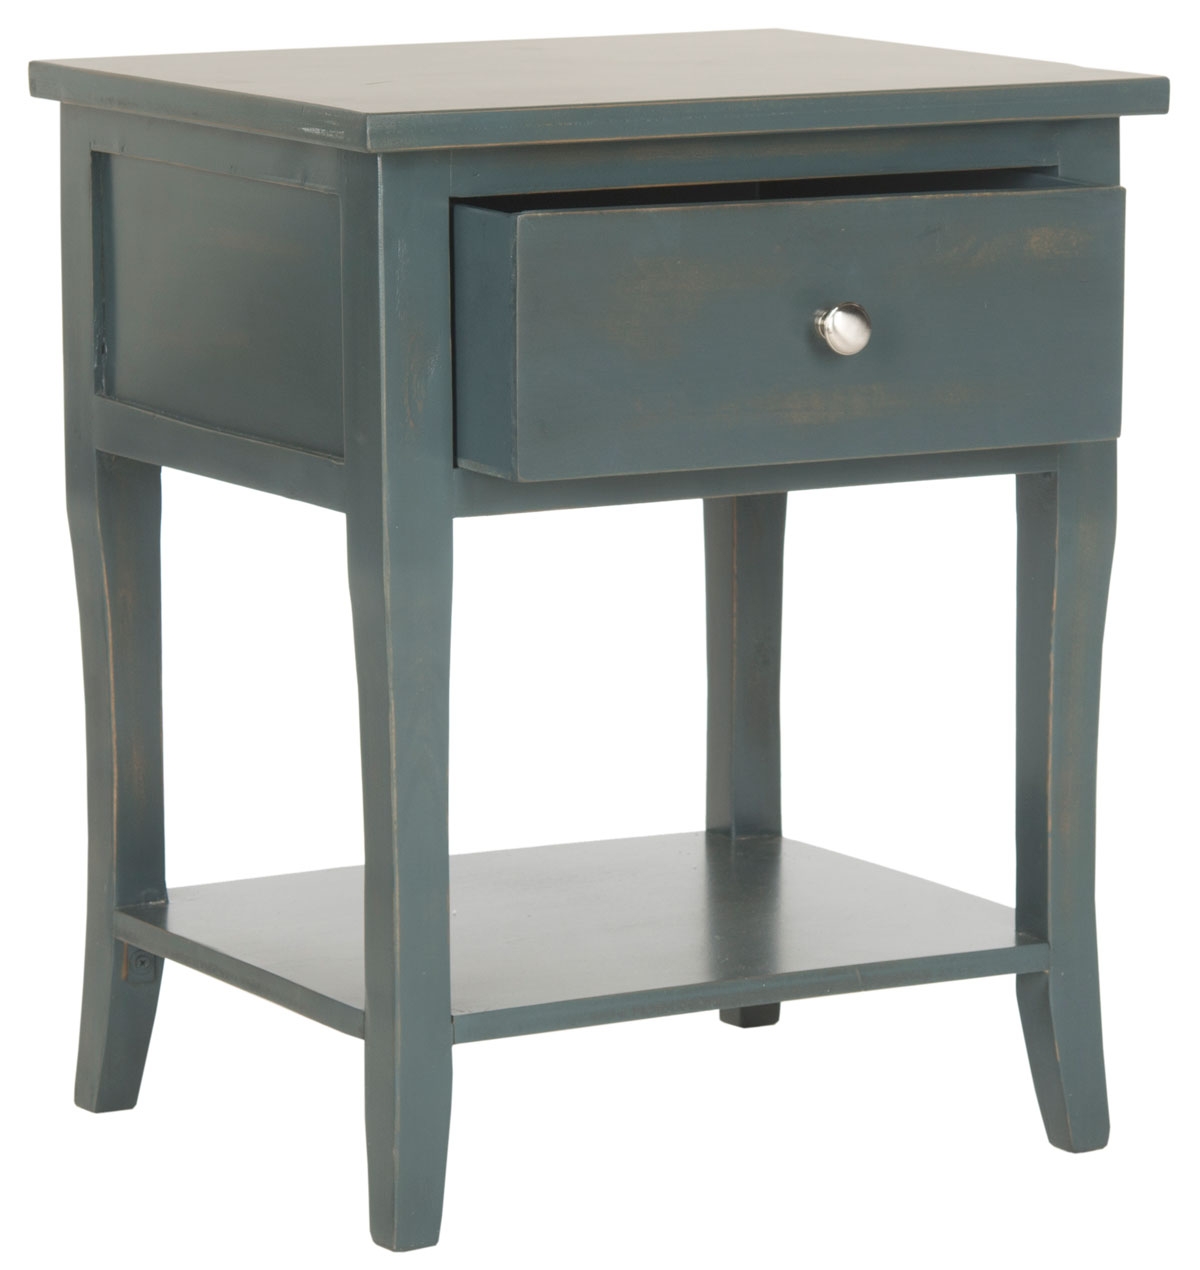 Coby Nightstand With Storage Drawer - Steel Teal - Arlo Home - Image 2